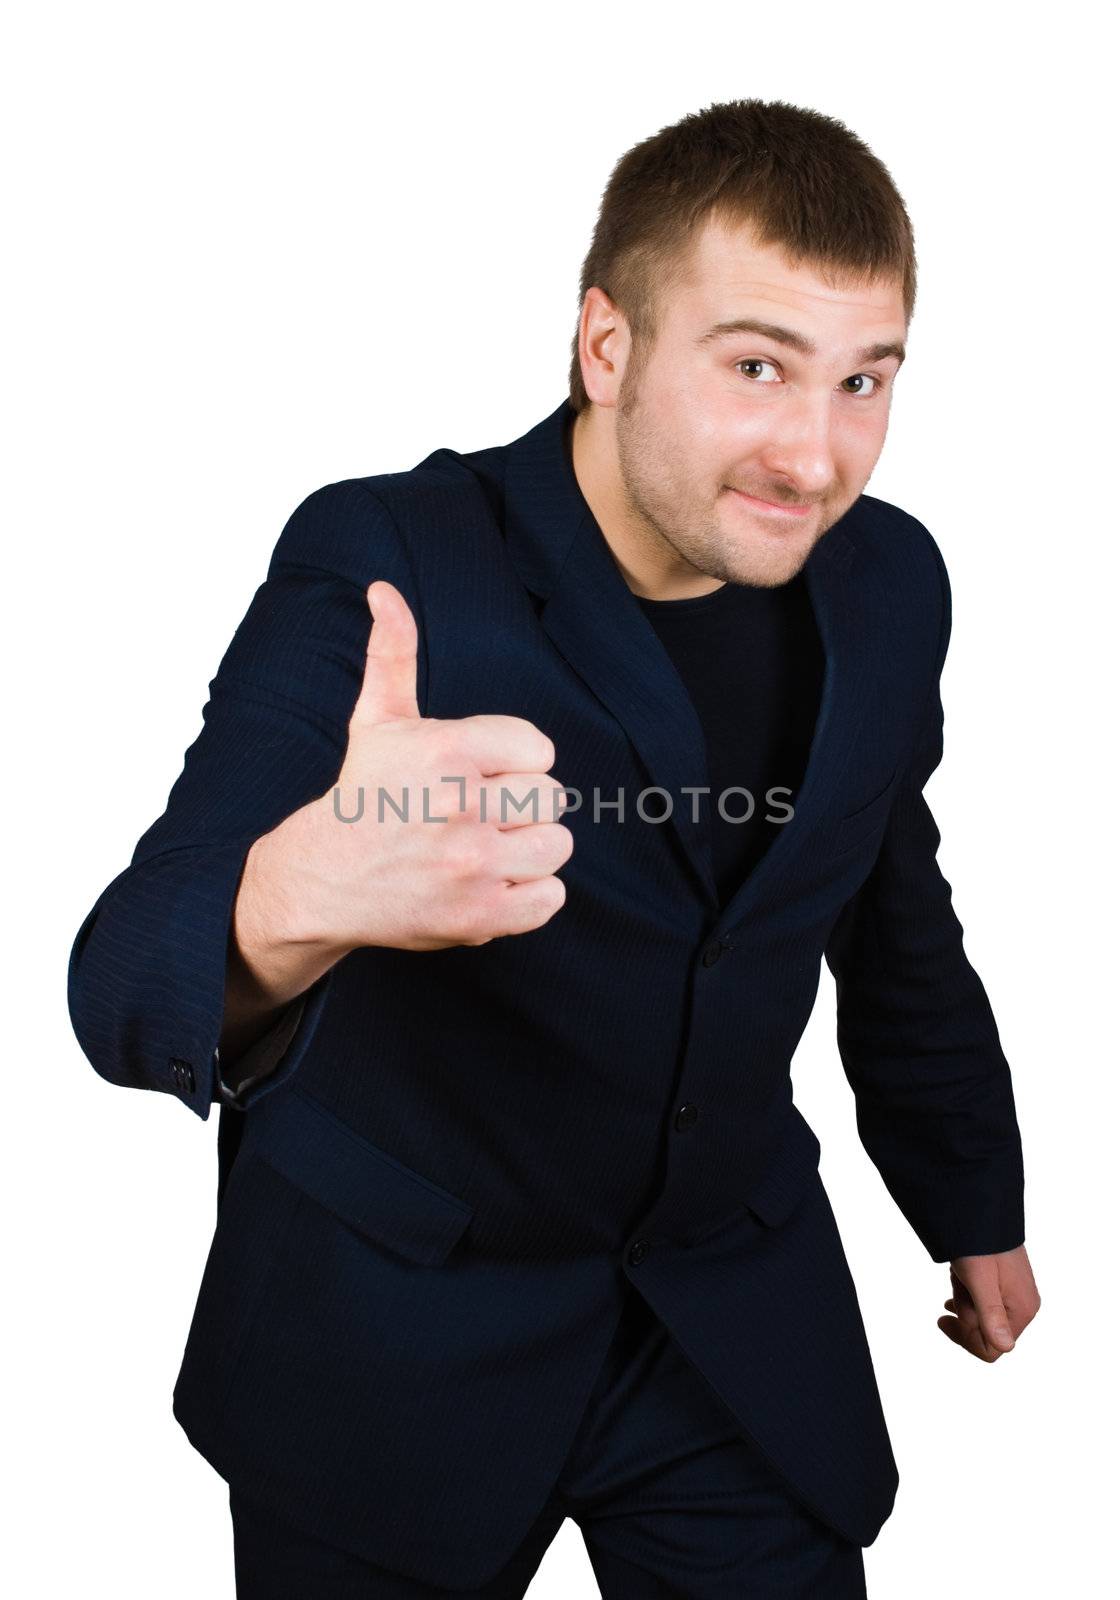 businessman show thumb up sing isolated over white with clipping path